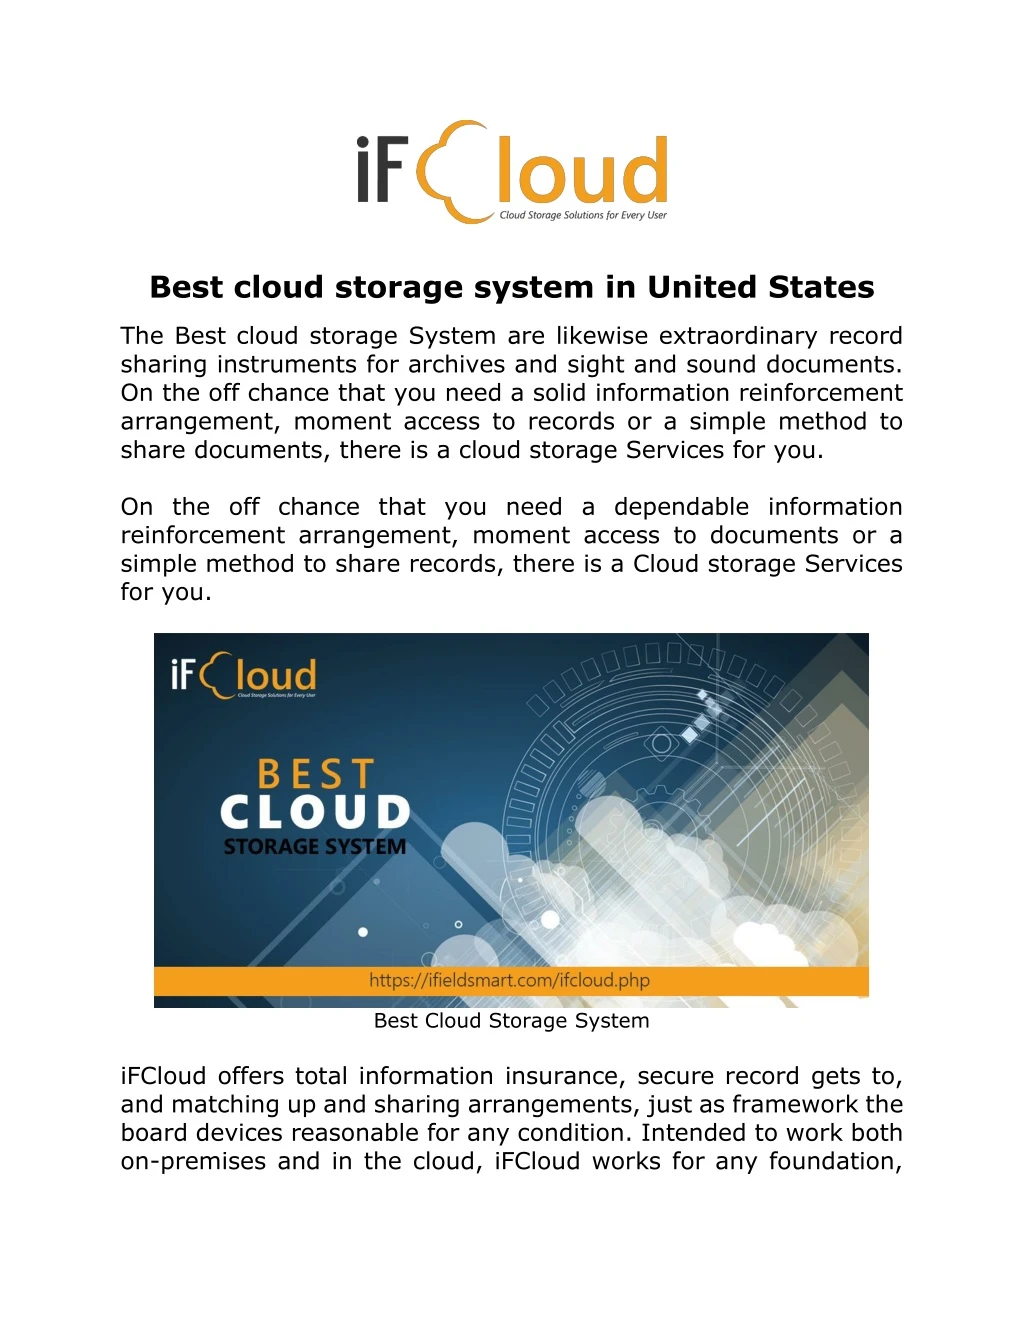 best cloud storage system in united states